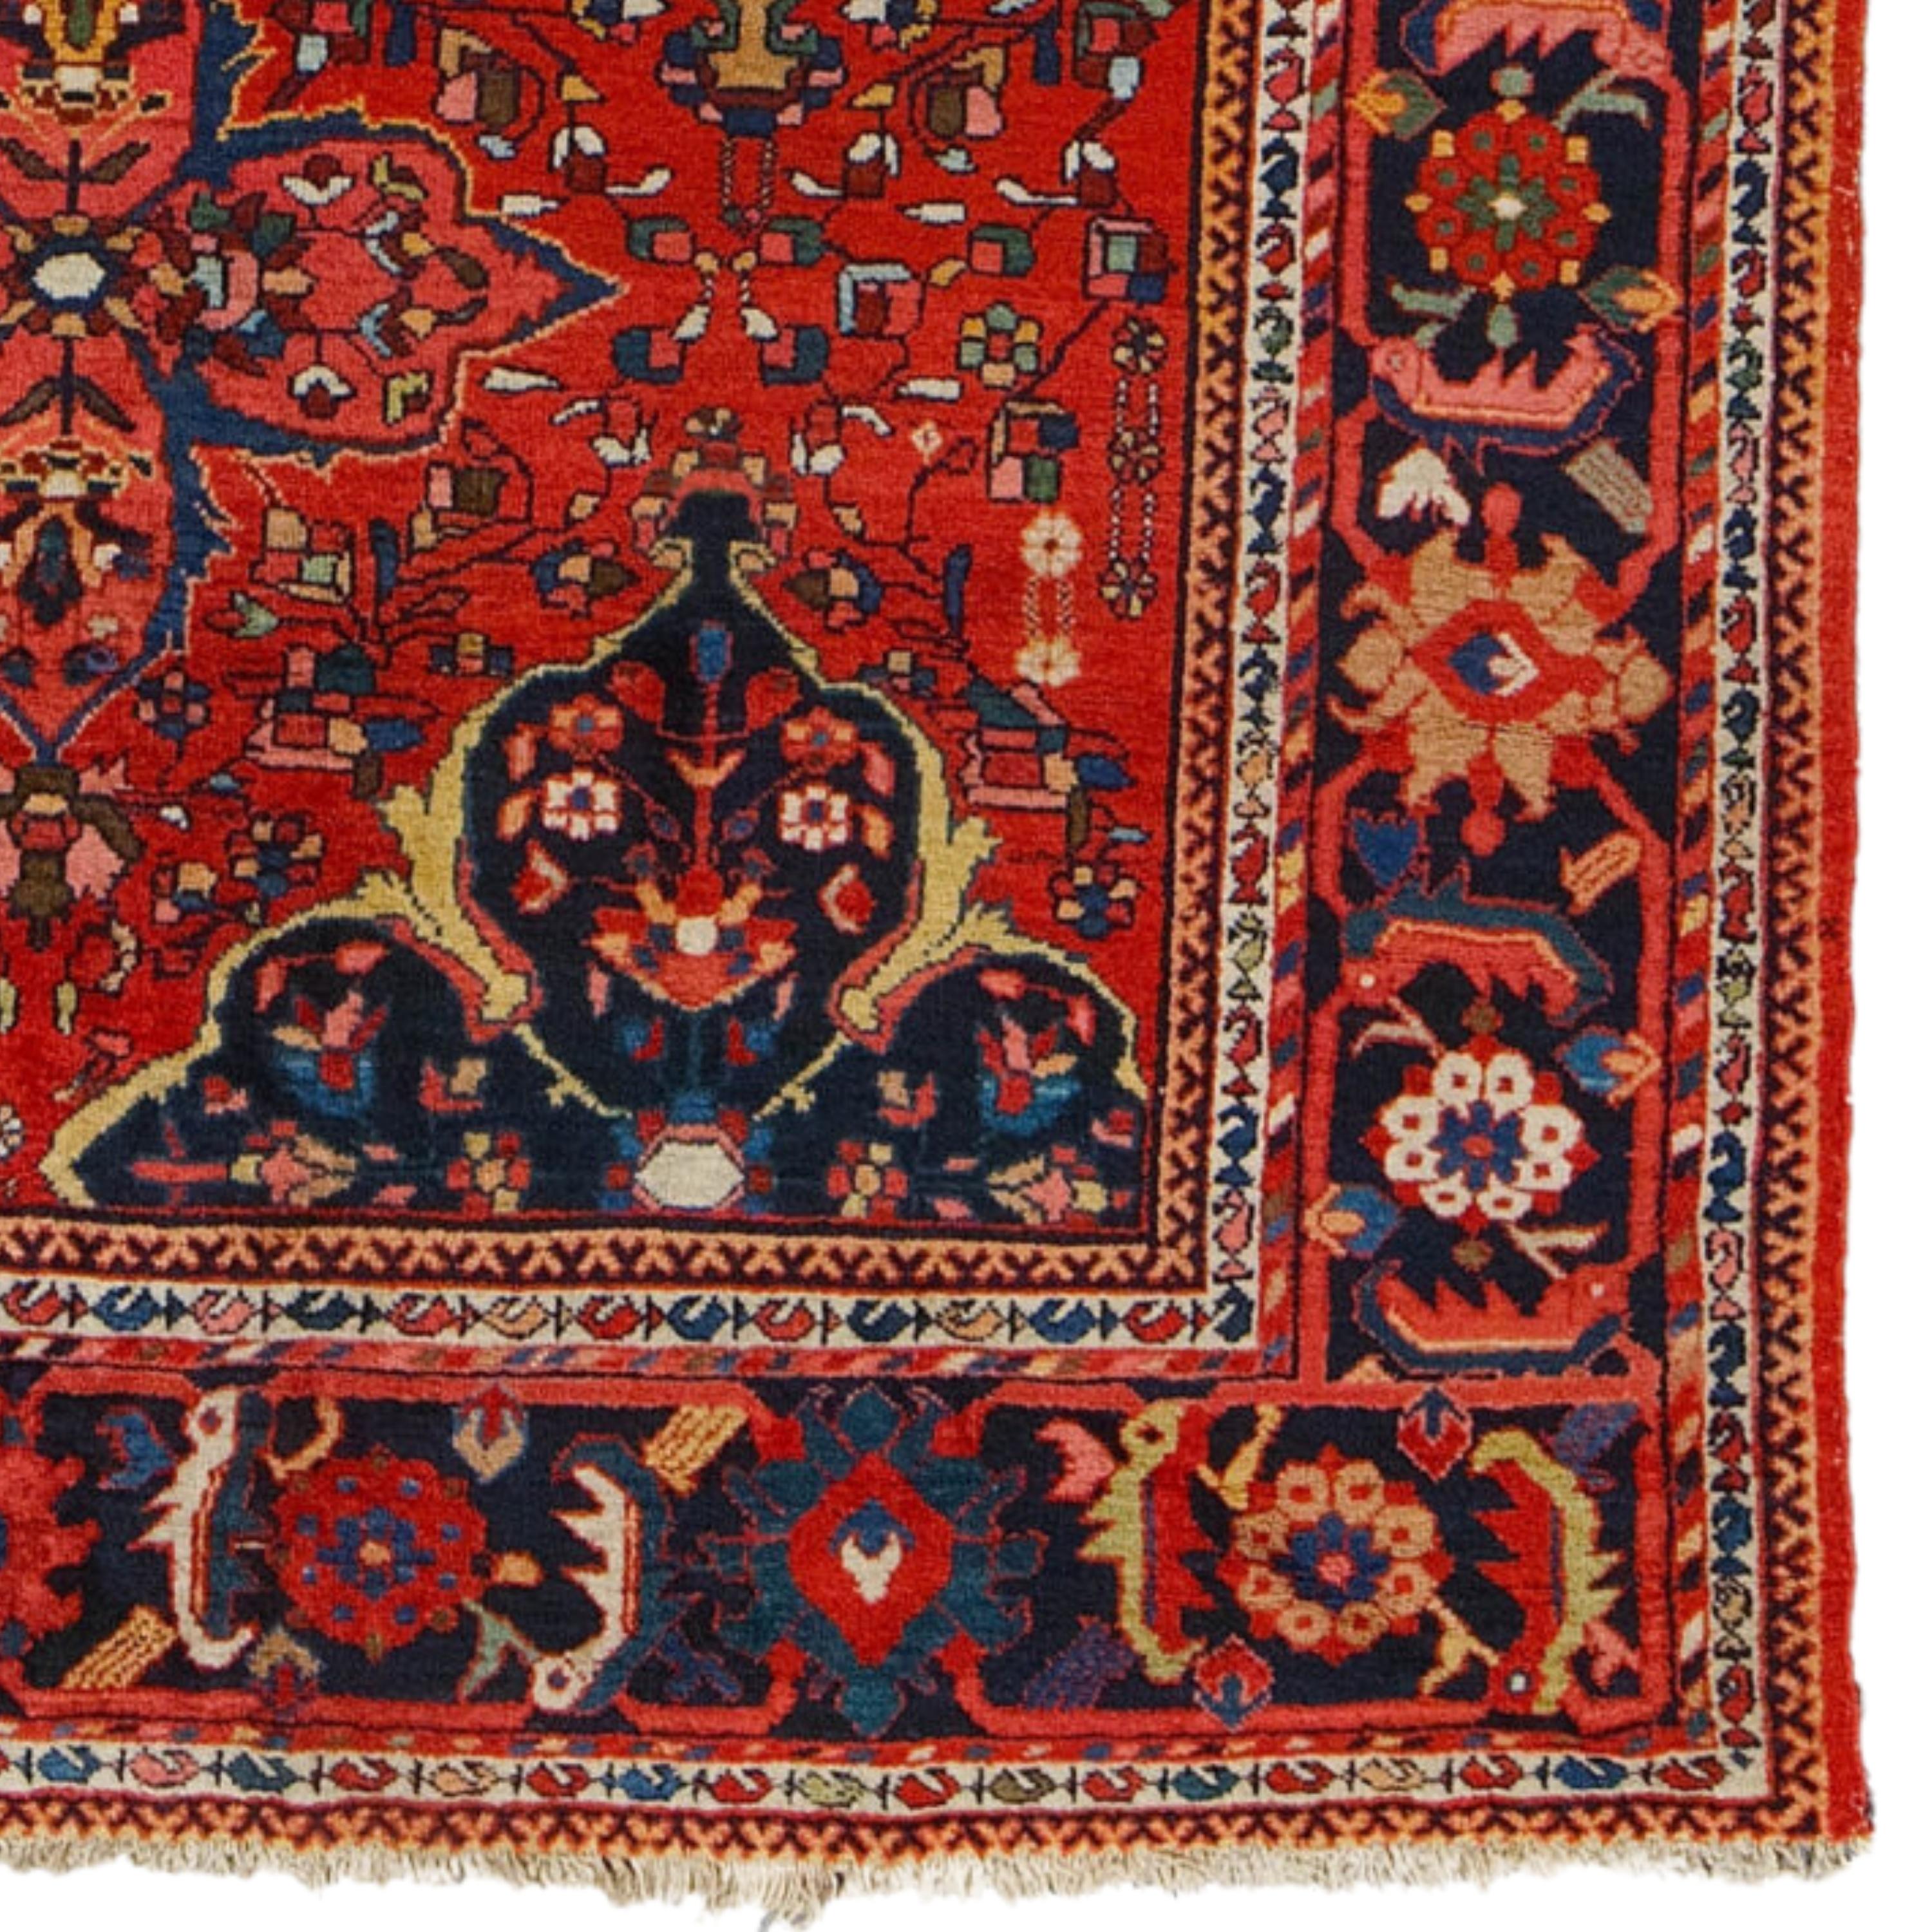 Wool Antique Mahal Carpet - Late of 19th Century Mahal Carpet, Antique Rug For Sale